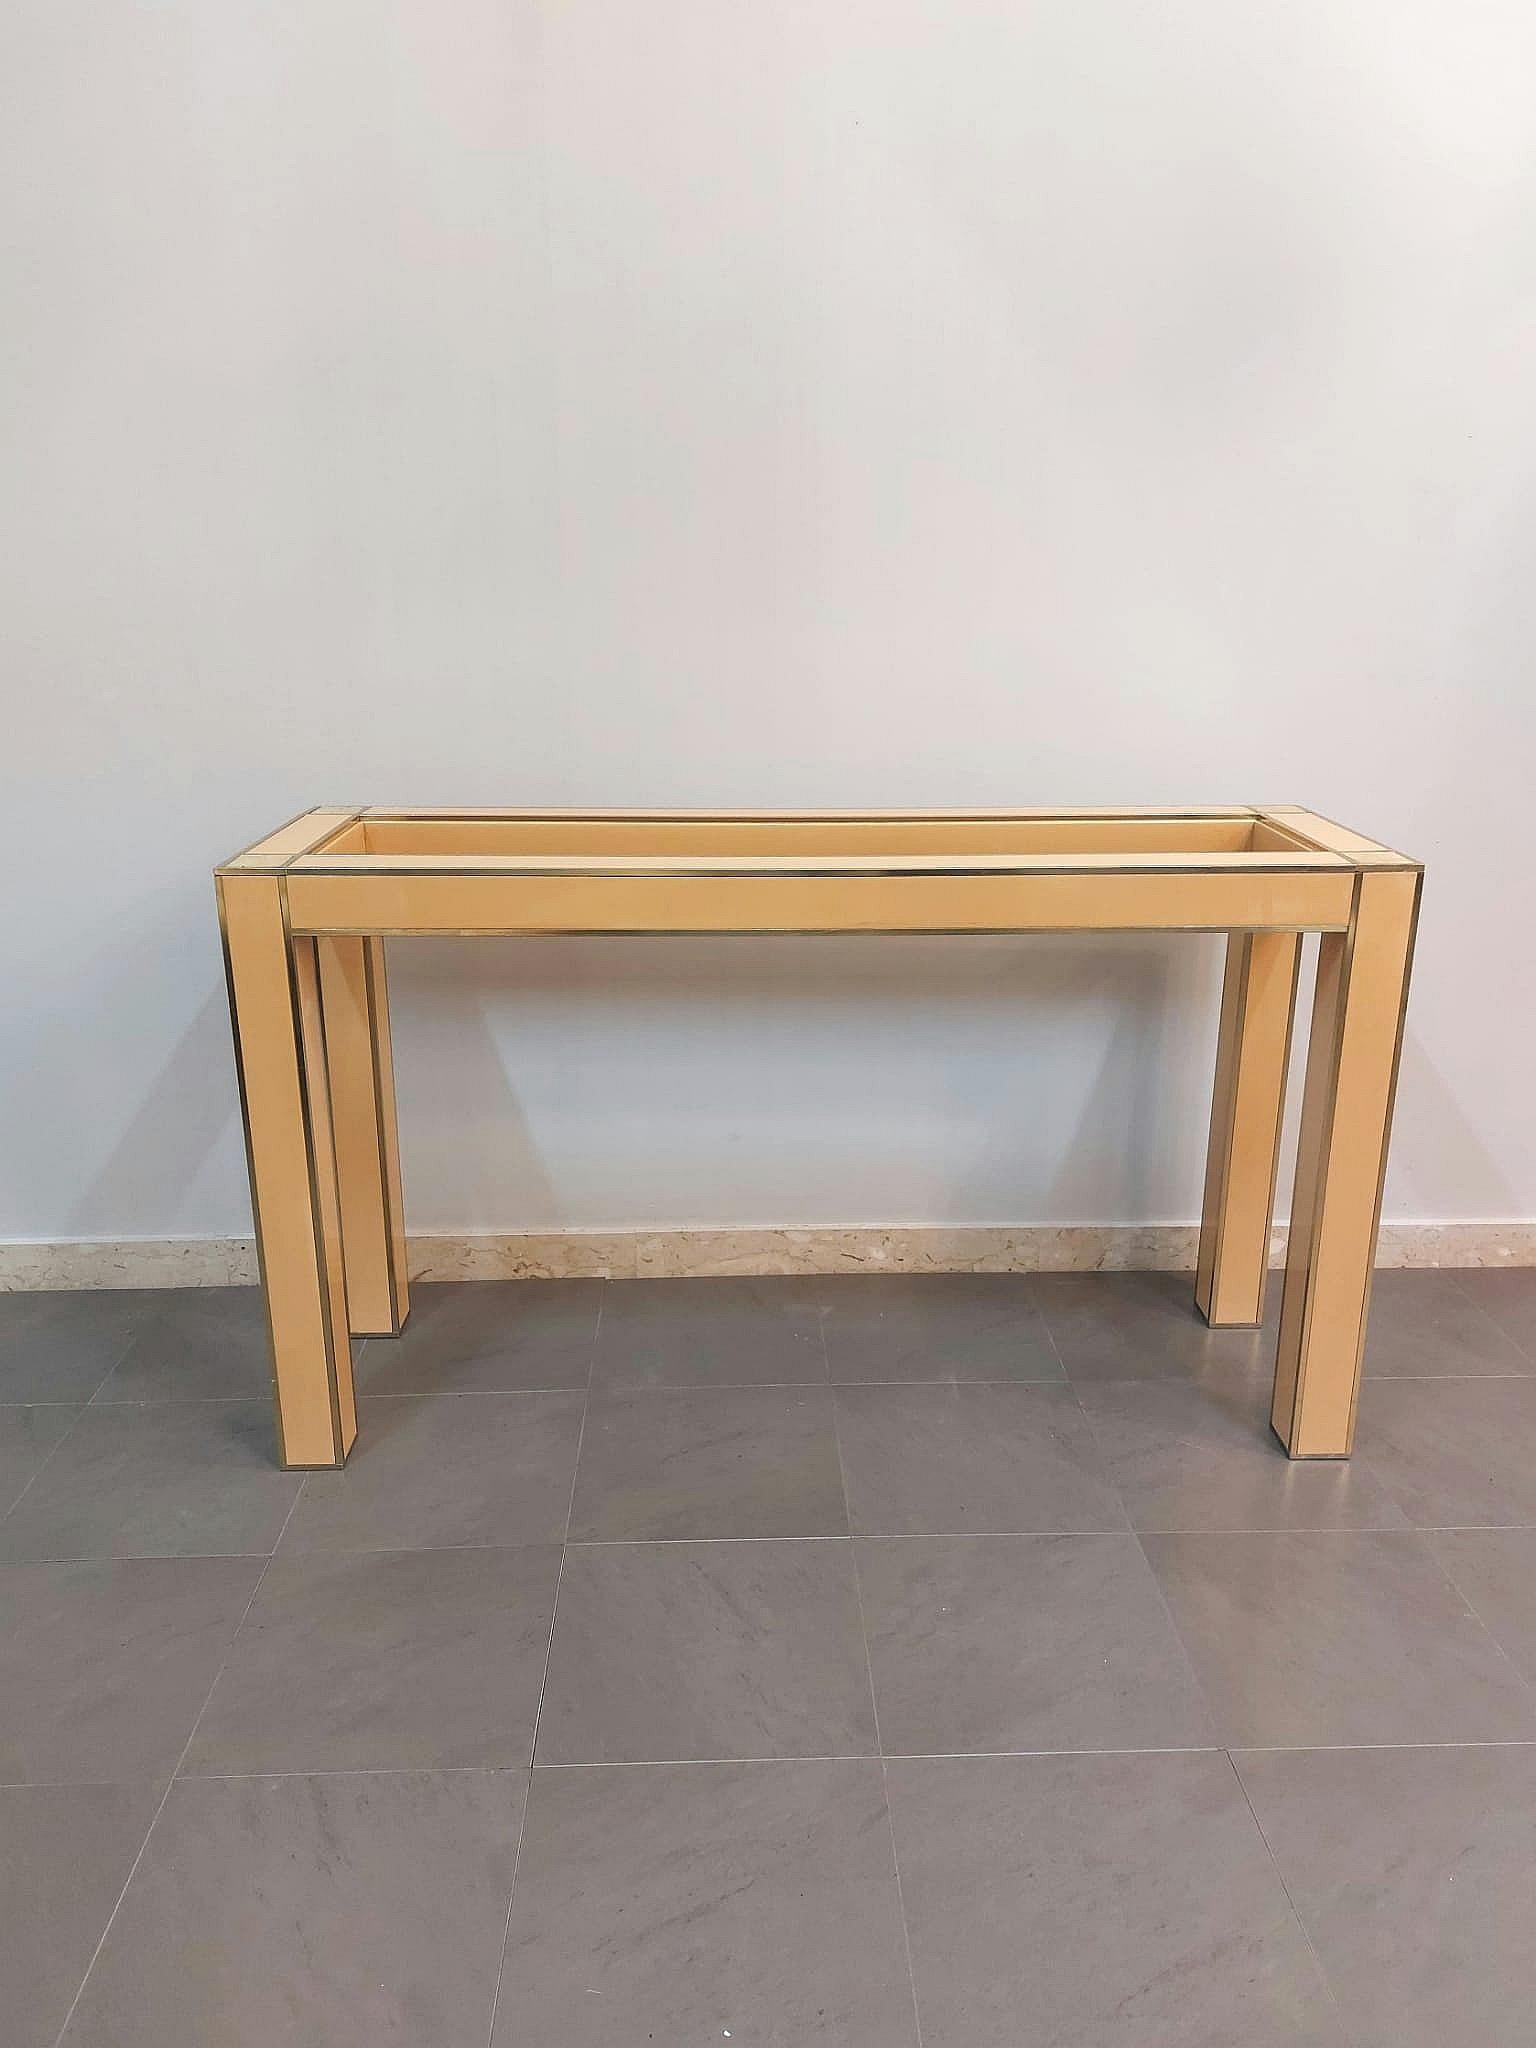 20th Century Midcentury Modern Console Table Lacquered Wood Glass Aluminum Italy 1970s For Sale